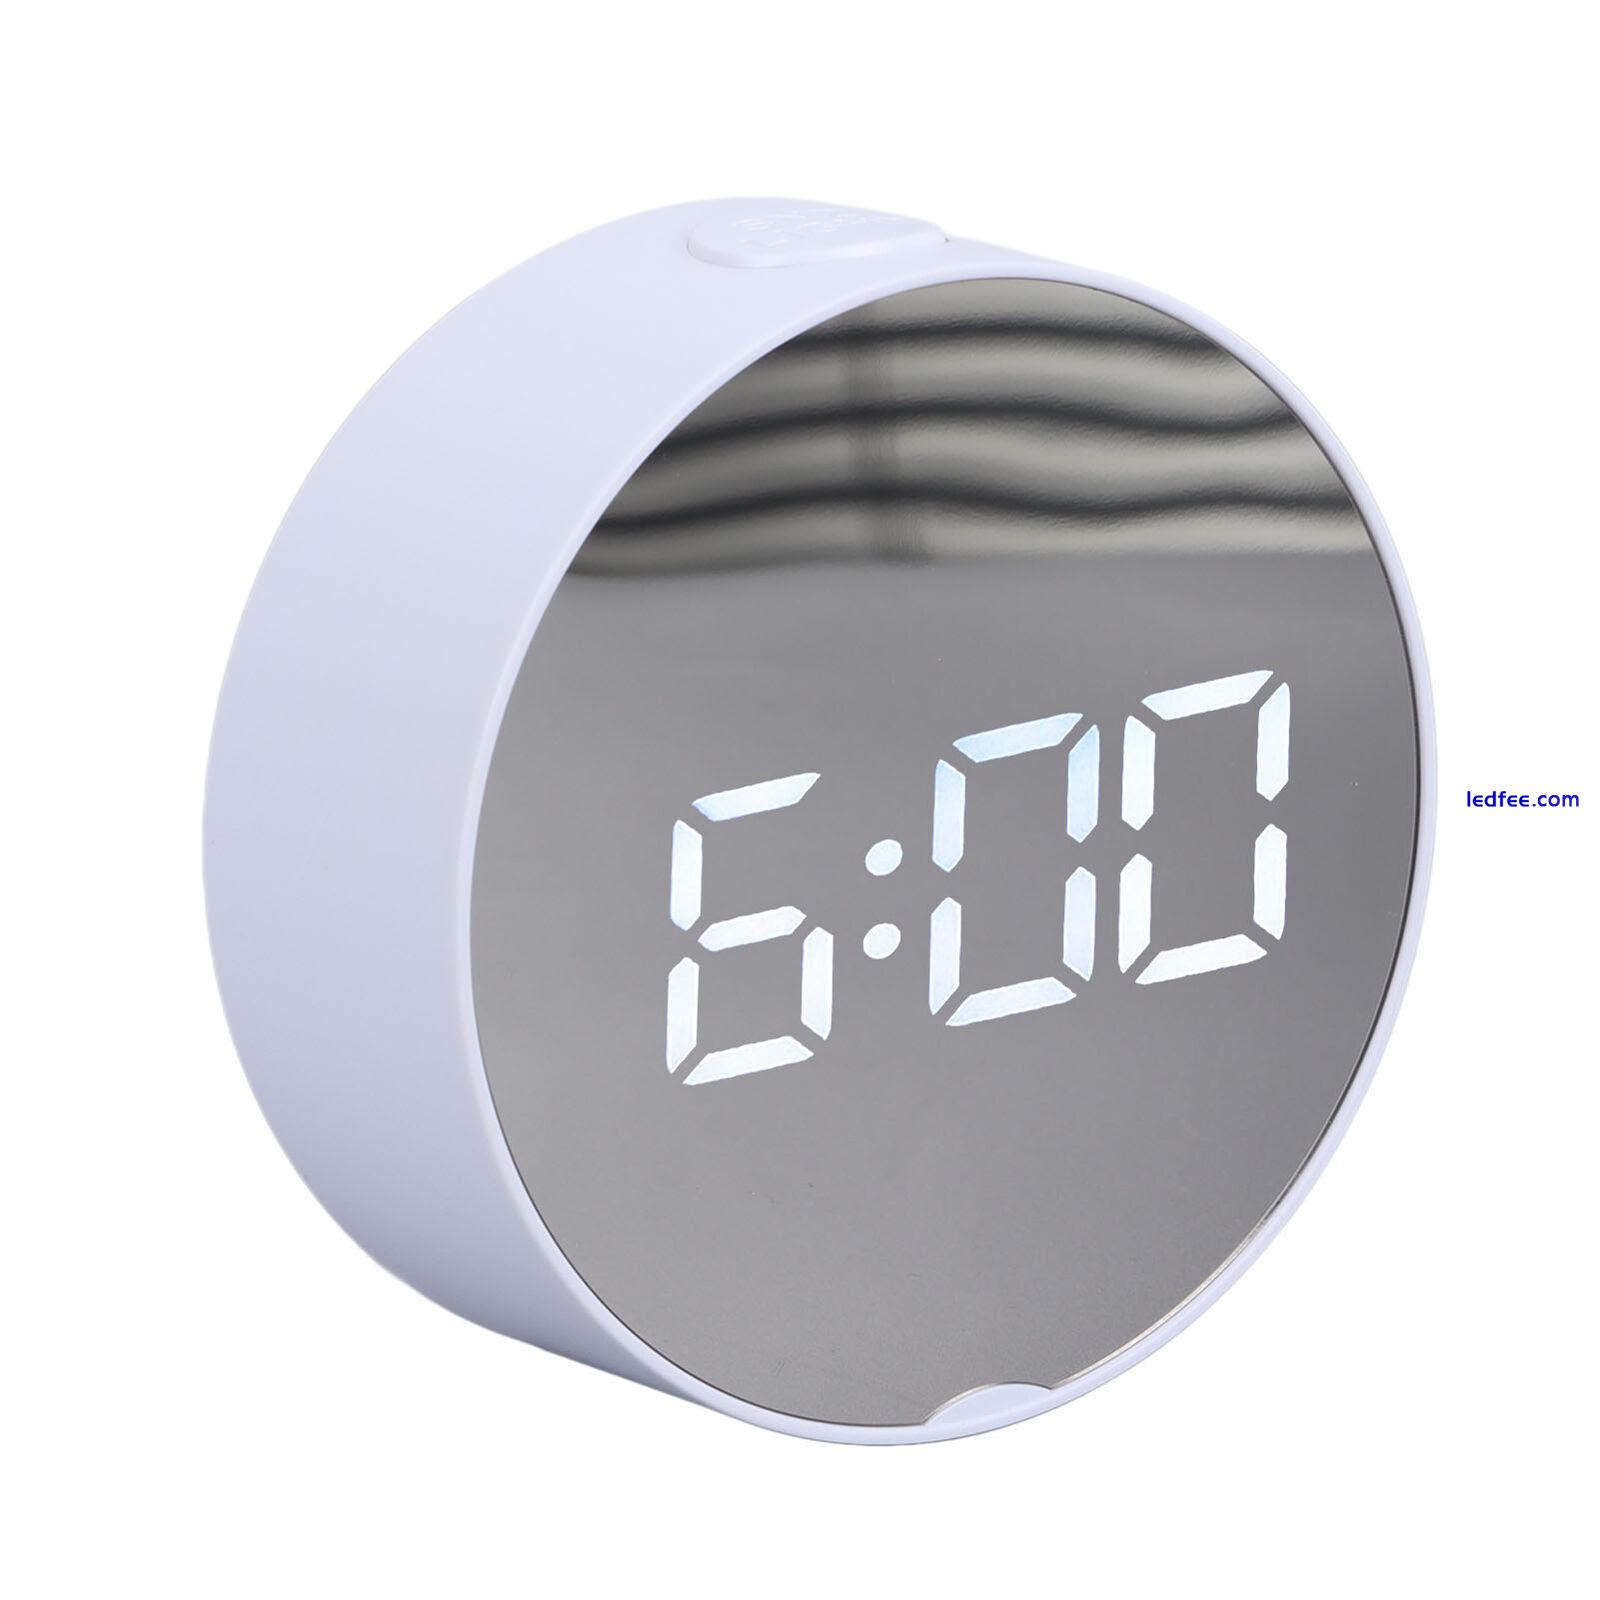 LED Mirror Alarm Easy To Read Portable Mirror Clock For Home 0 